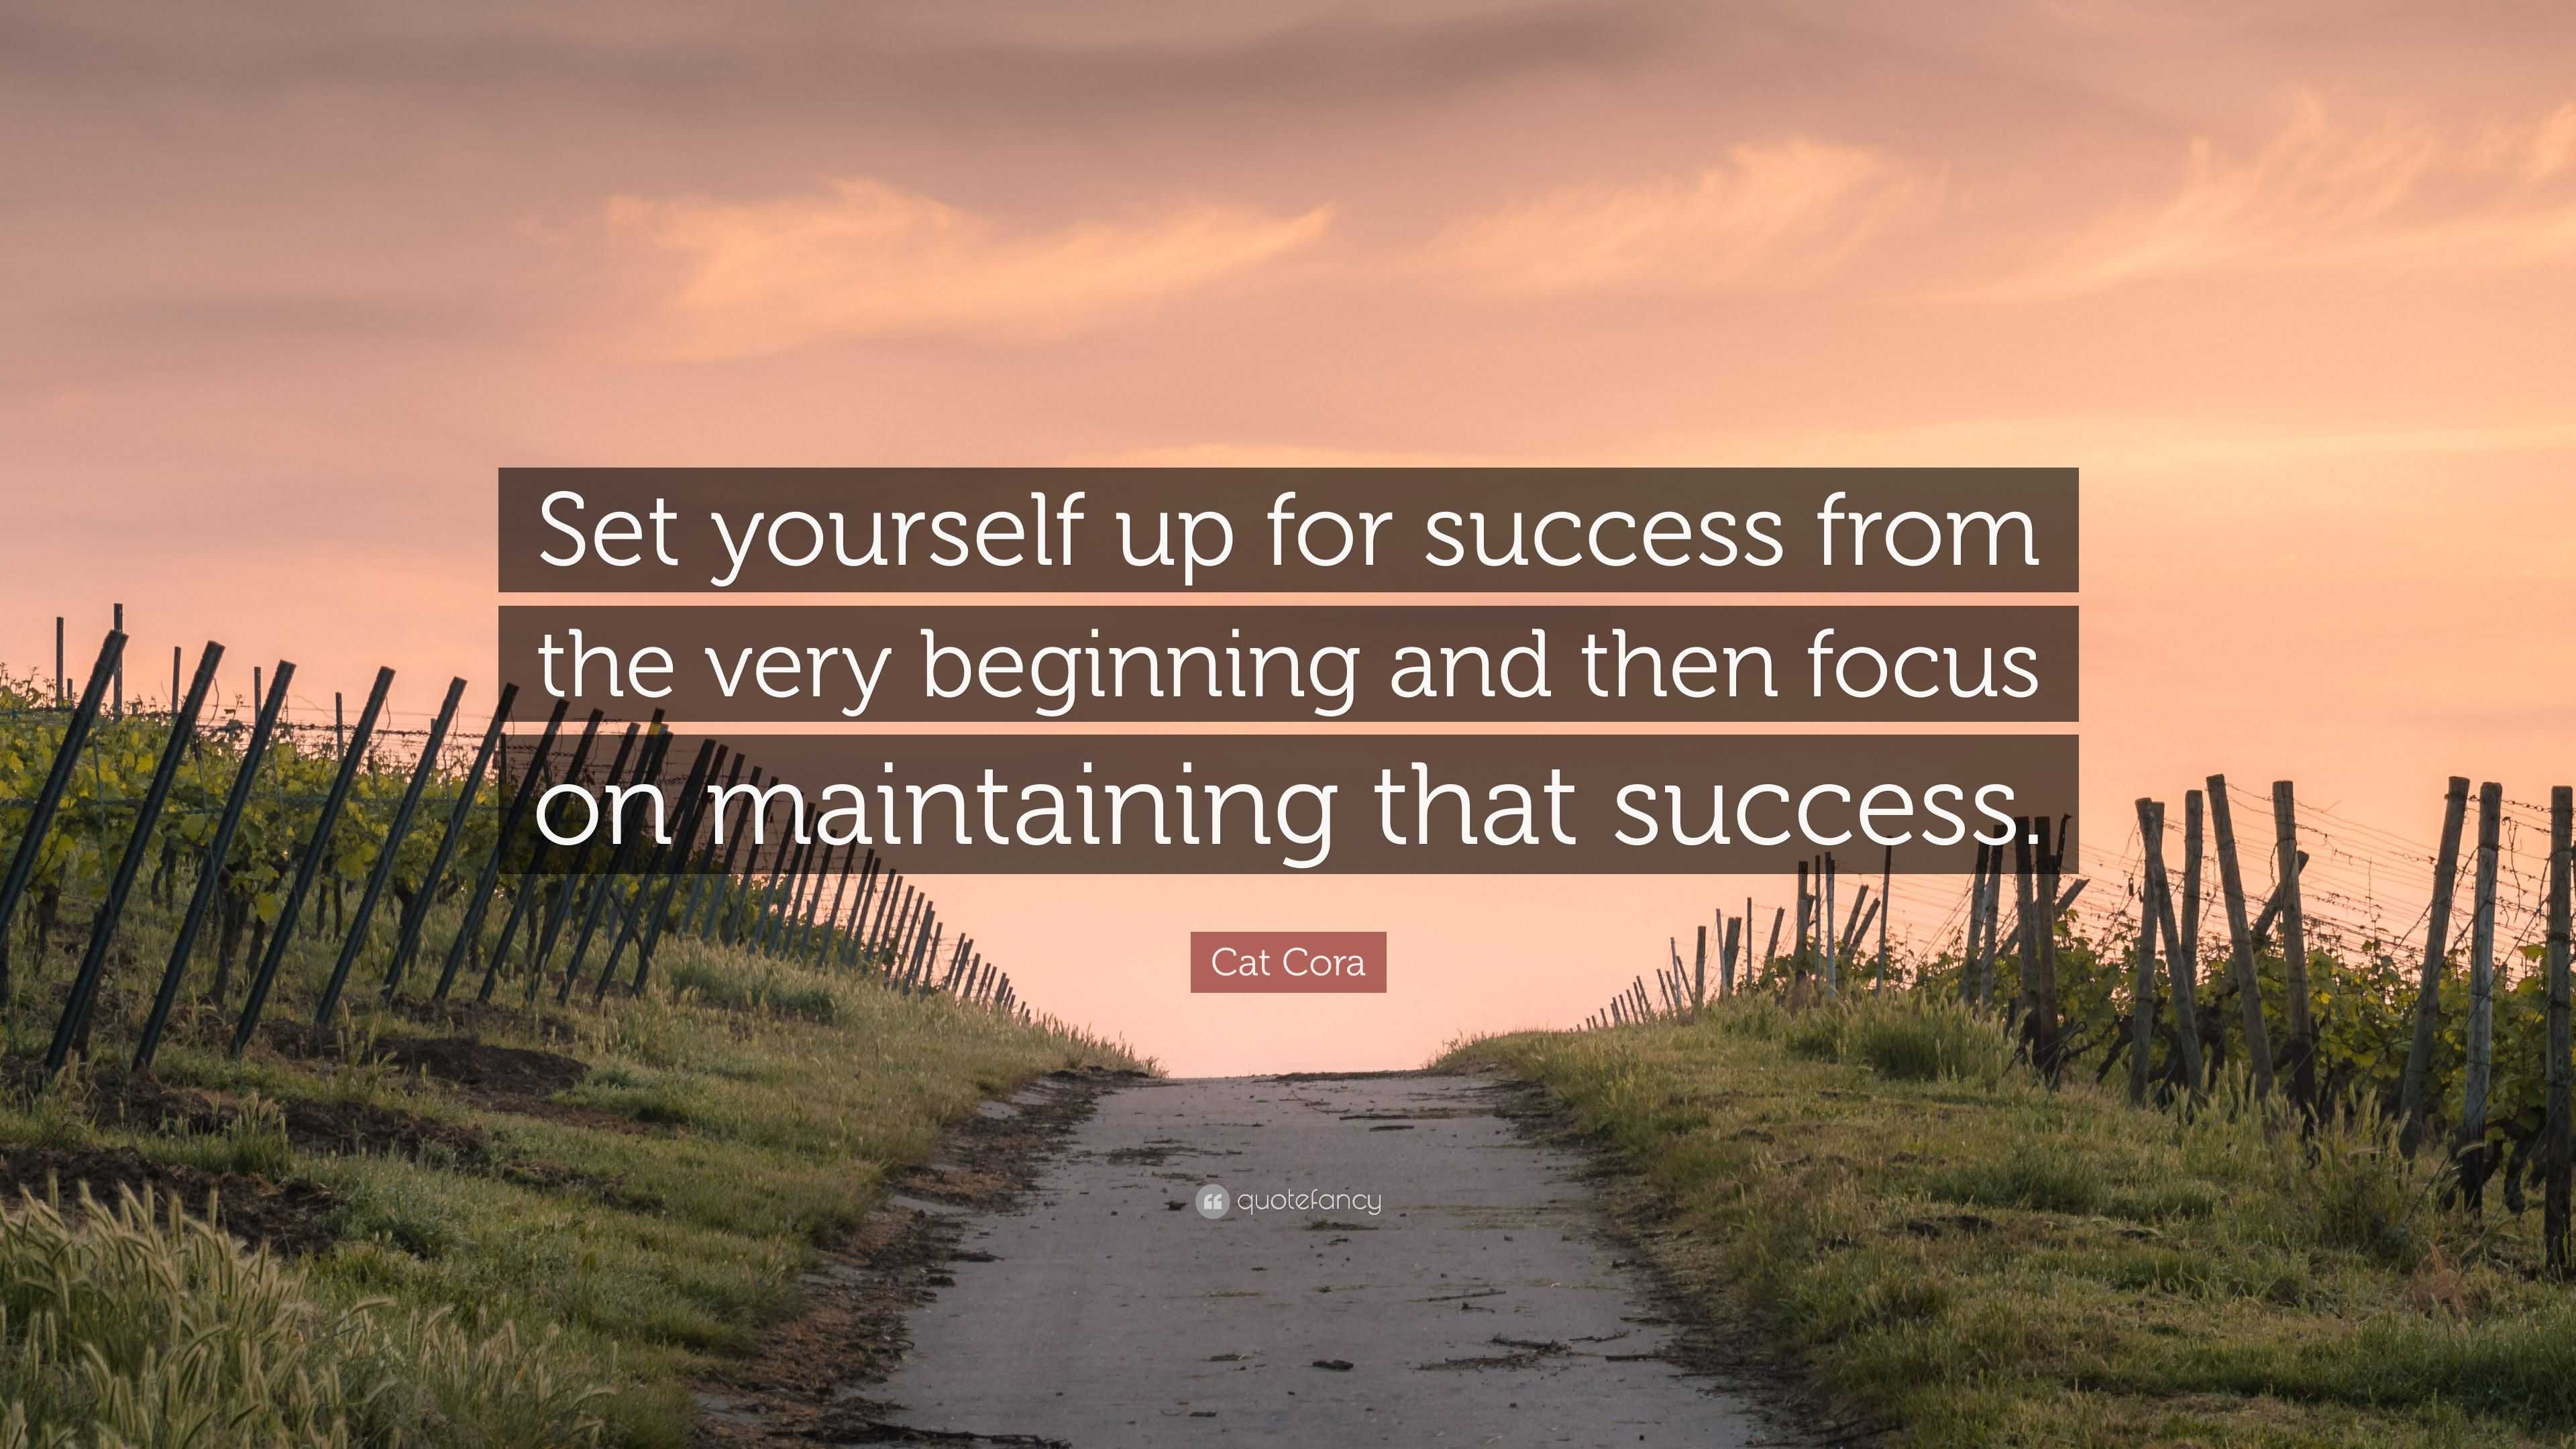 Cat Cora Quote: “Set yourself up for success from the very beginning ...